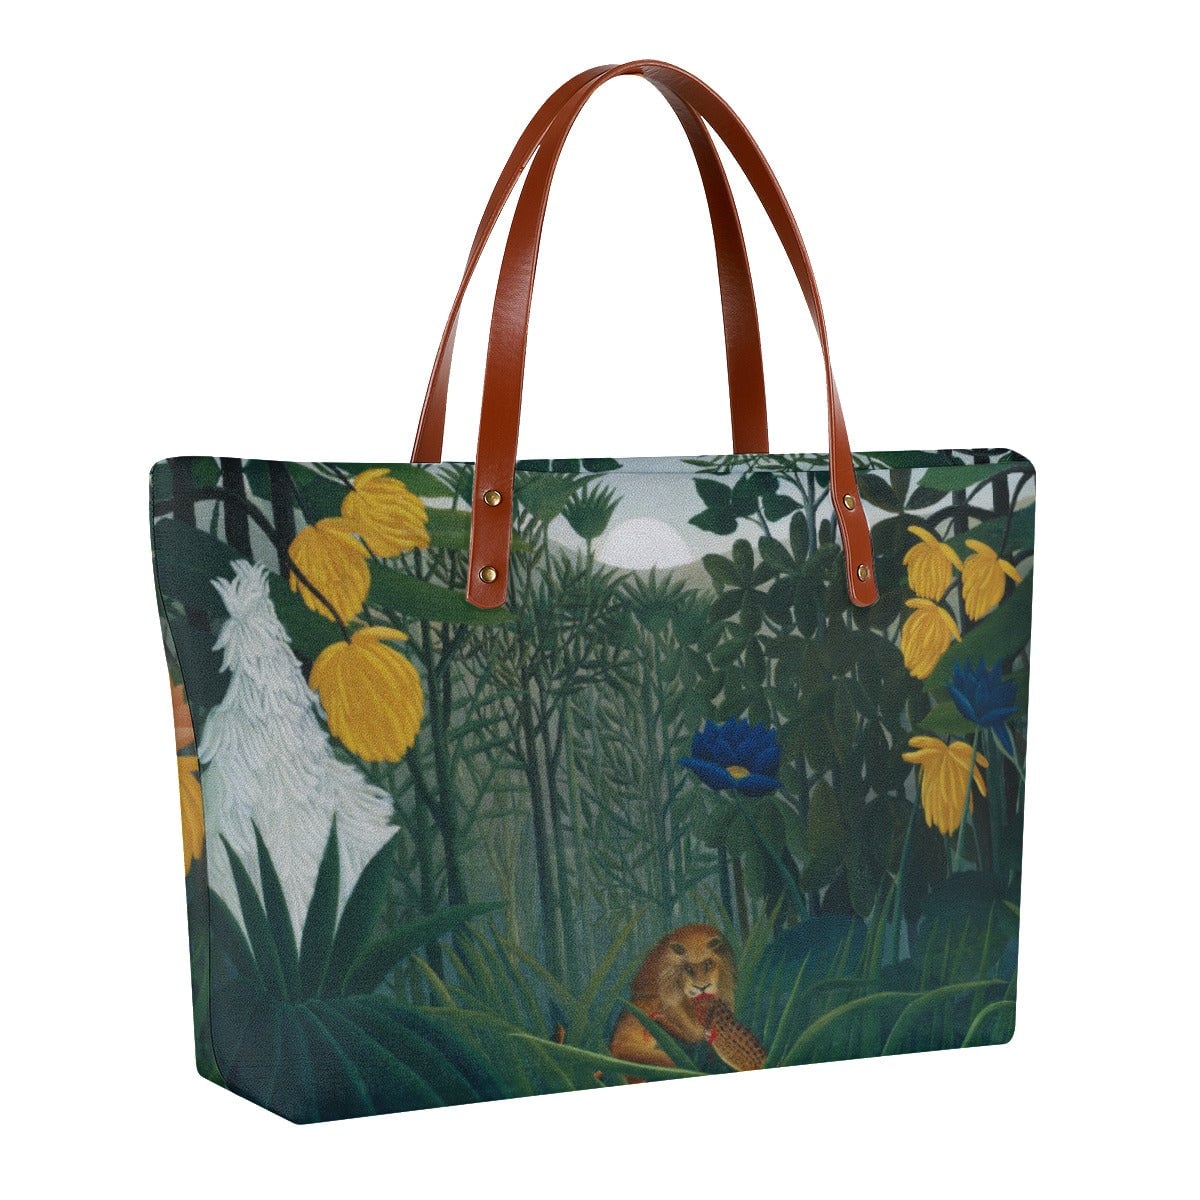 The Repast of the Lion Henri Rousseau Tote Bag